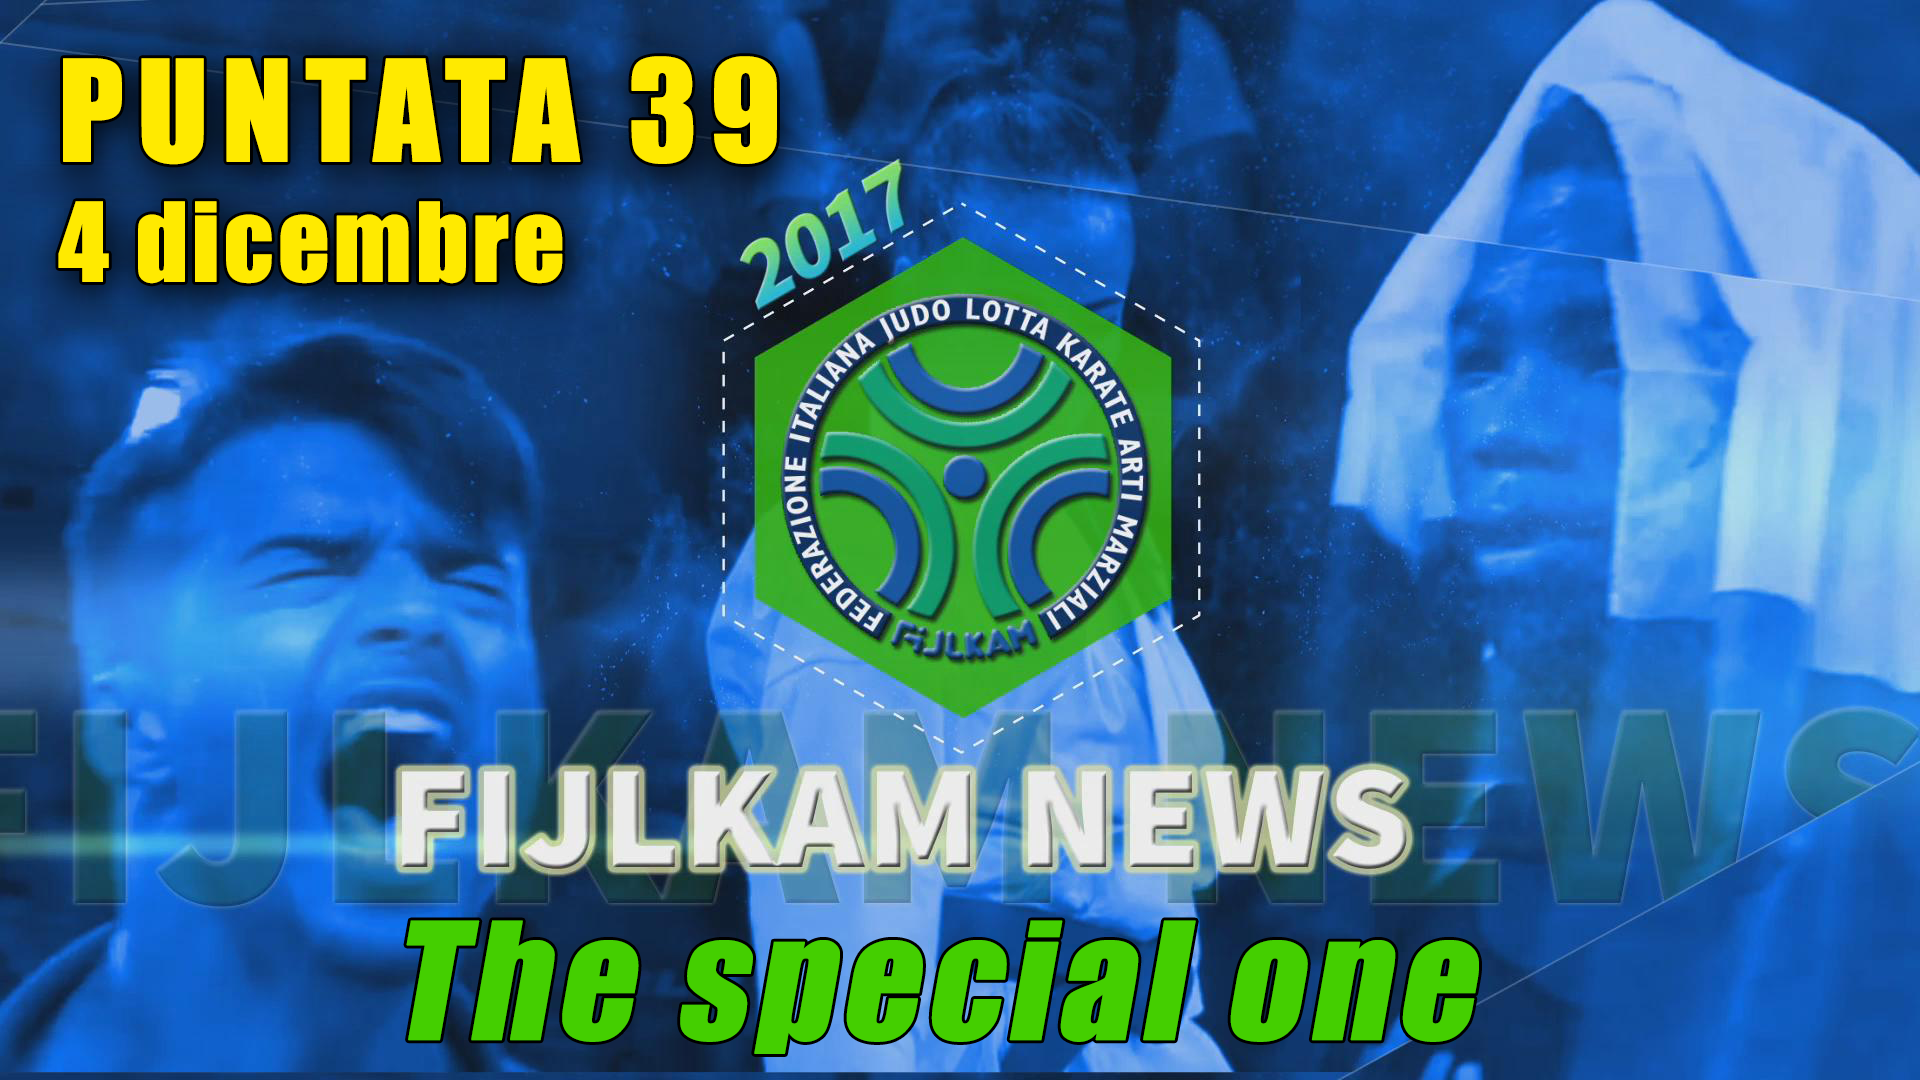 FIJLKAM NEWS 39 - The Special One